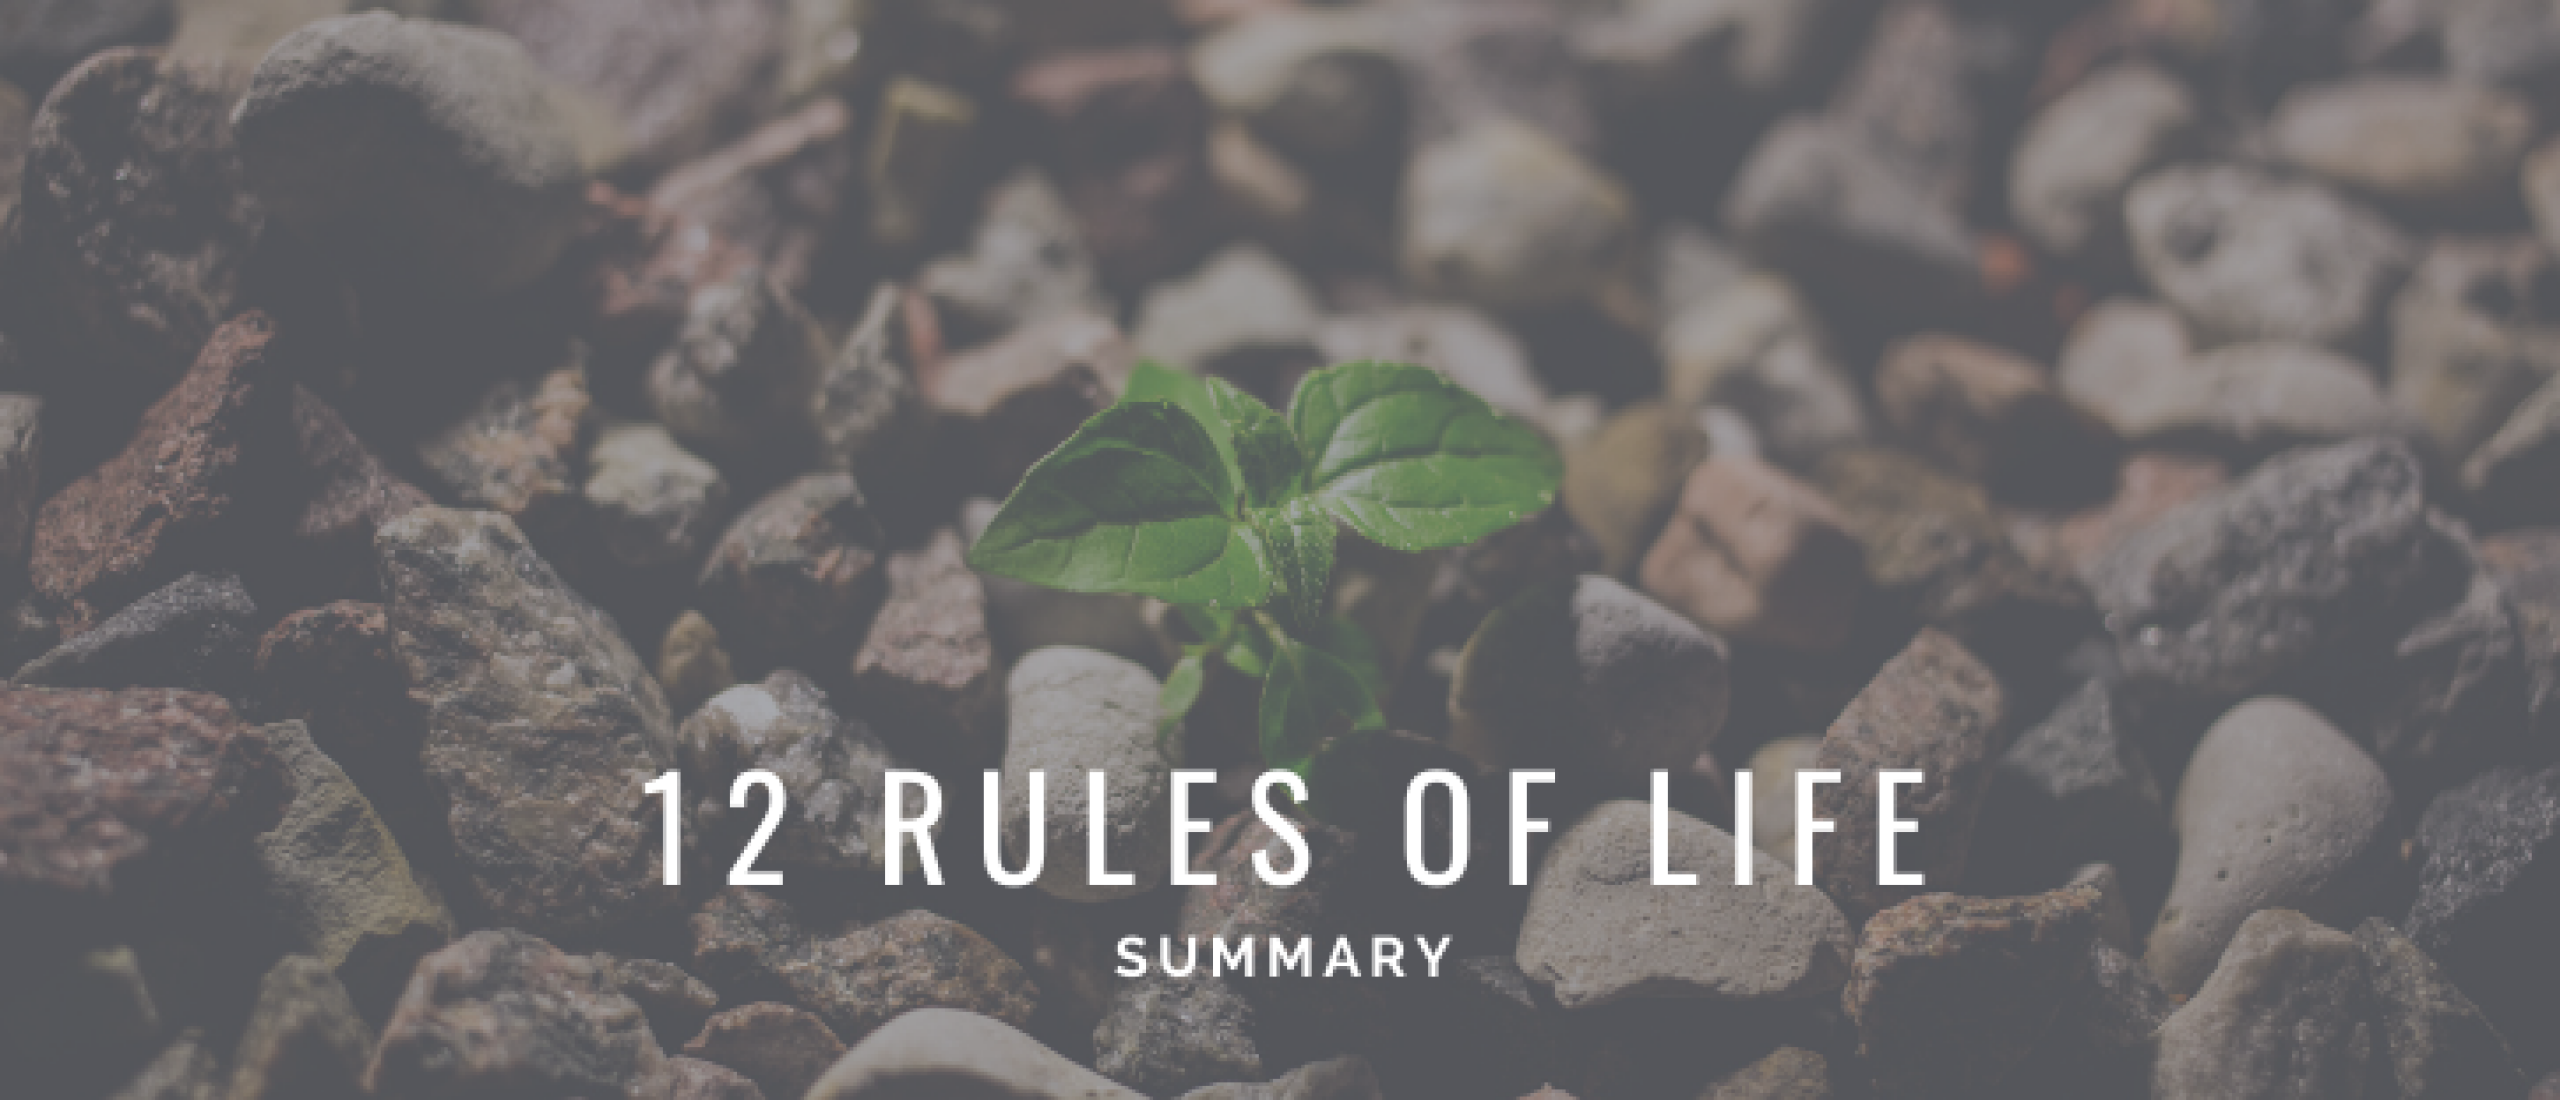 Summary 12 Rules for Life by Jordan B. Peterson